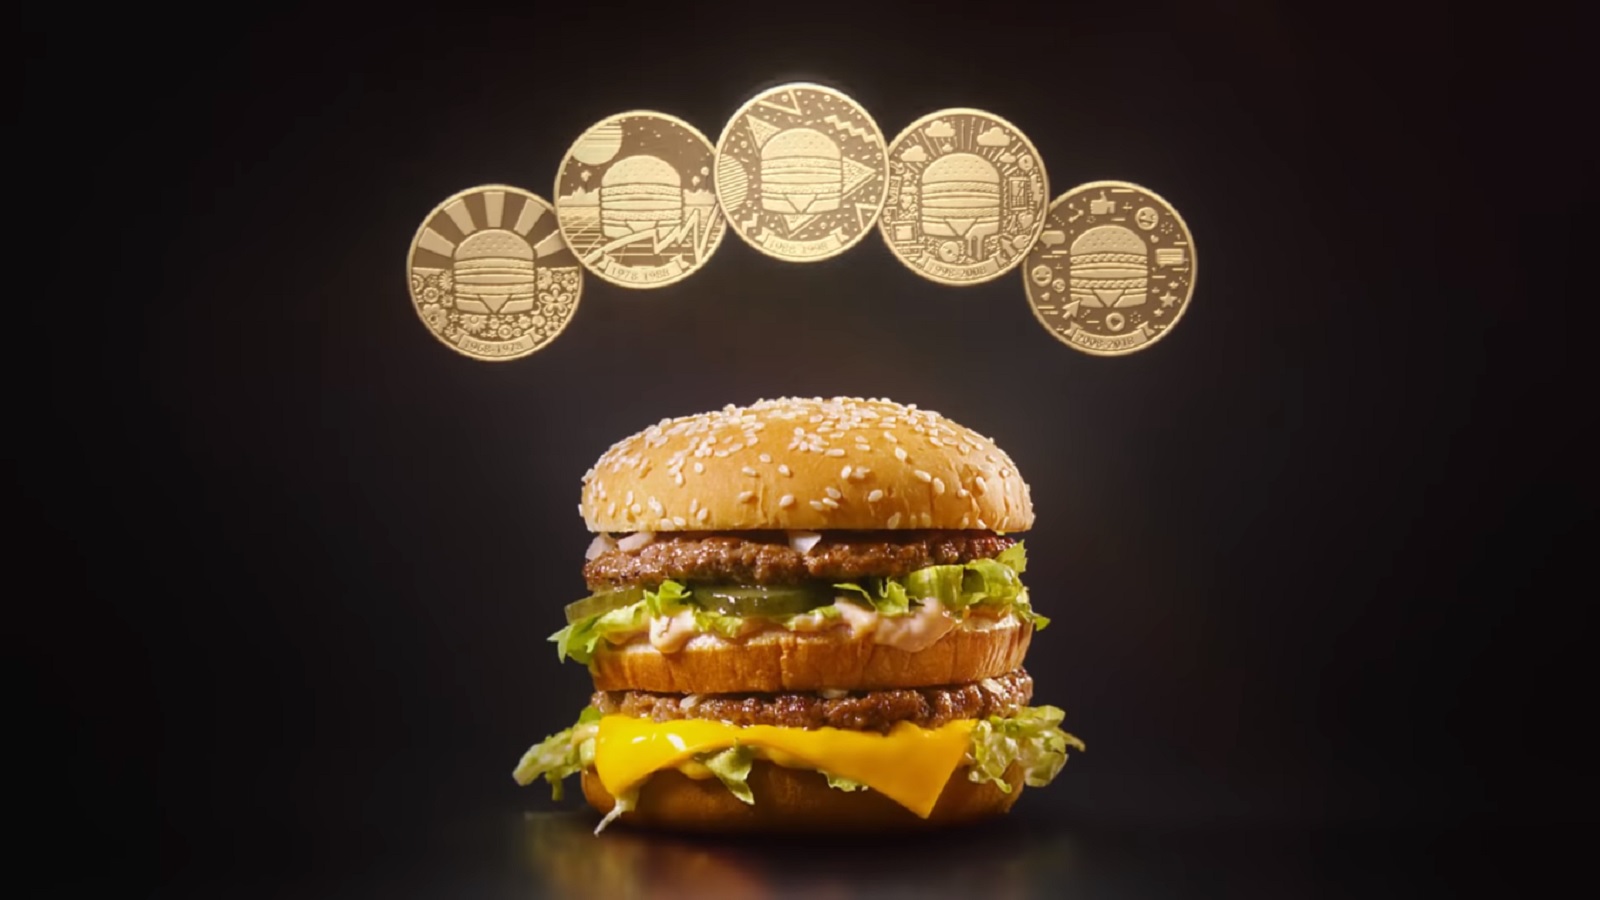 Y’All! McDonald’s New Dollar-Dollar Coin Might Make You Rich!